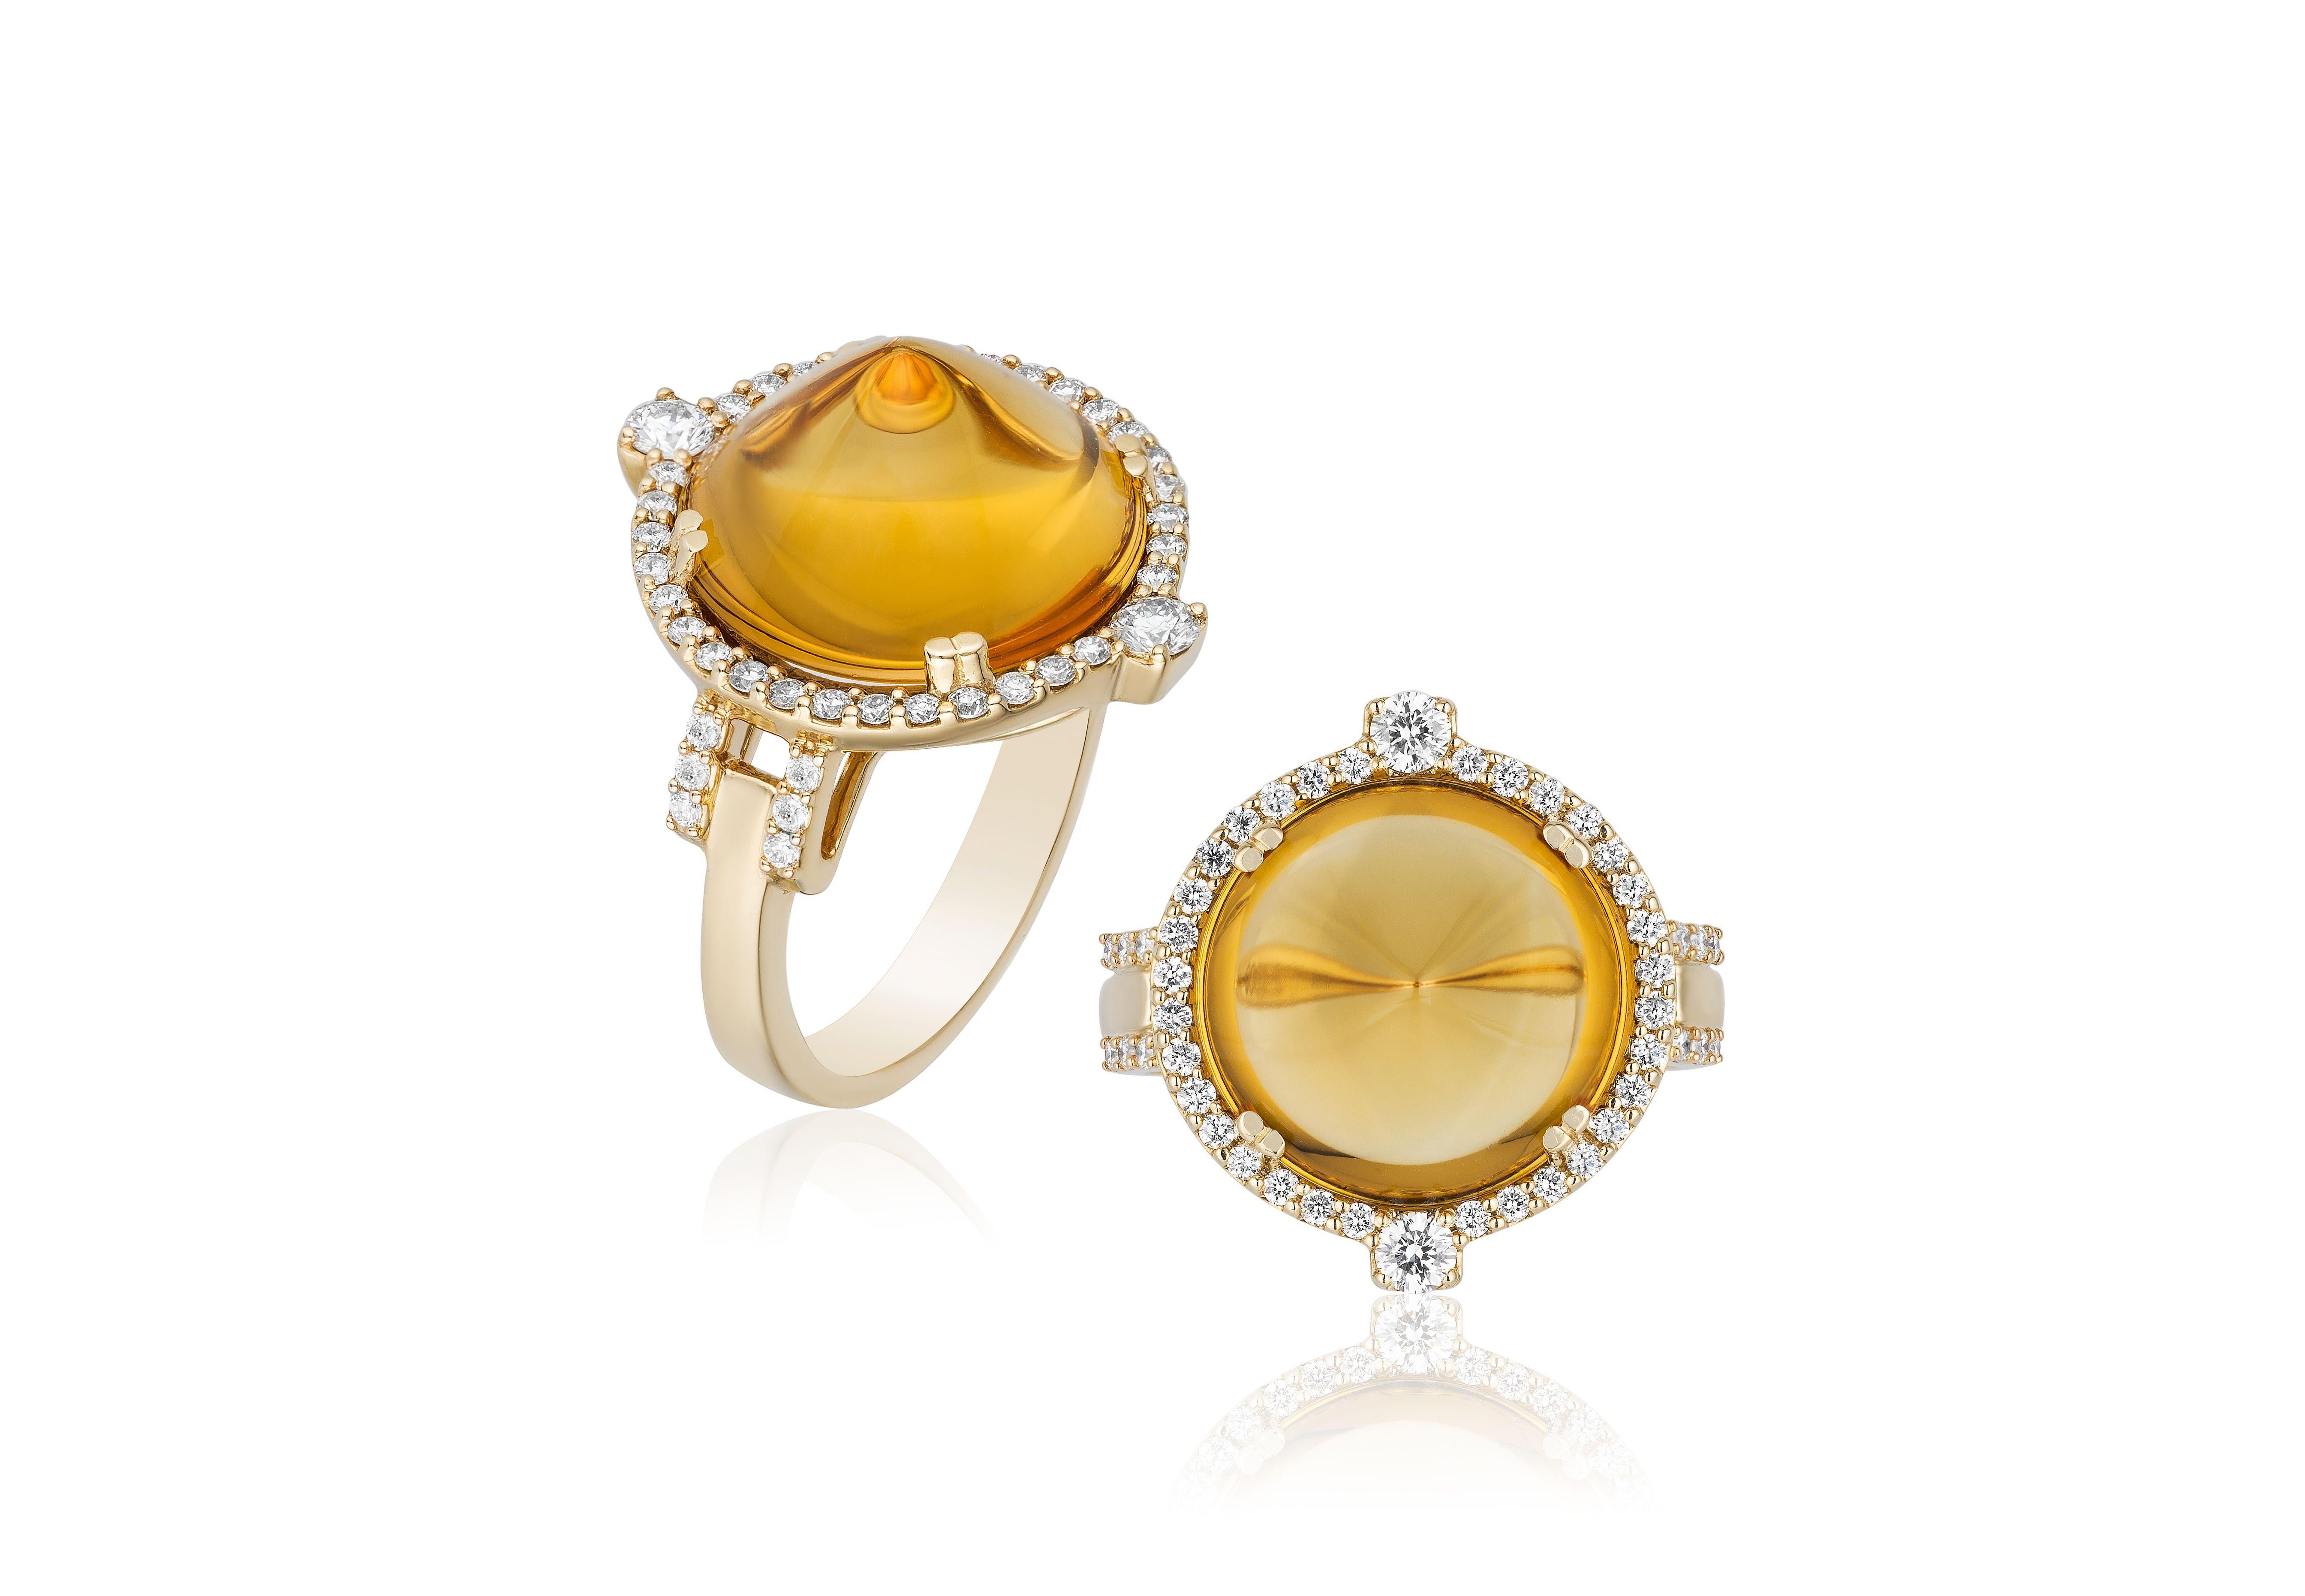 Citrine Sugar Loaf Ring in 18K Yellow Gold with Diamonds, from 'Rock 'N Roll' Collection. Extensive collection of big and bold pieces. Like the music, this Rock ‘n Roll collection is electric in color and very stimulating to the eye. These exciting